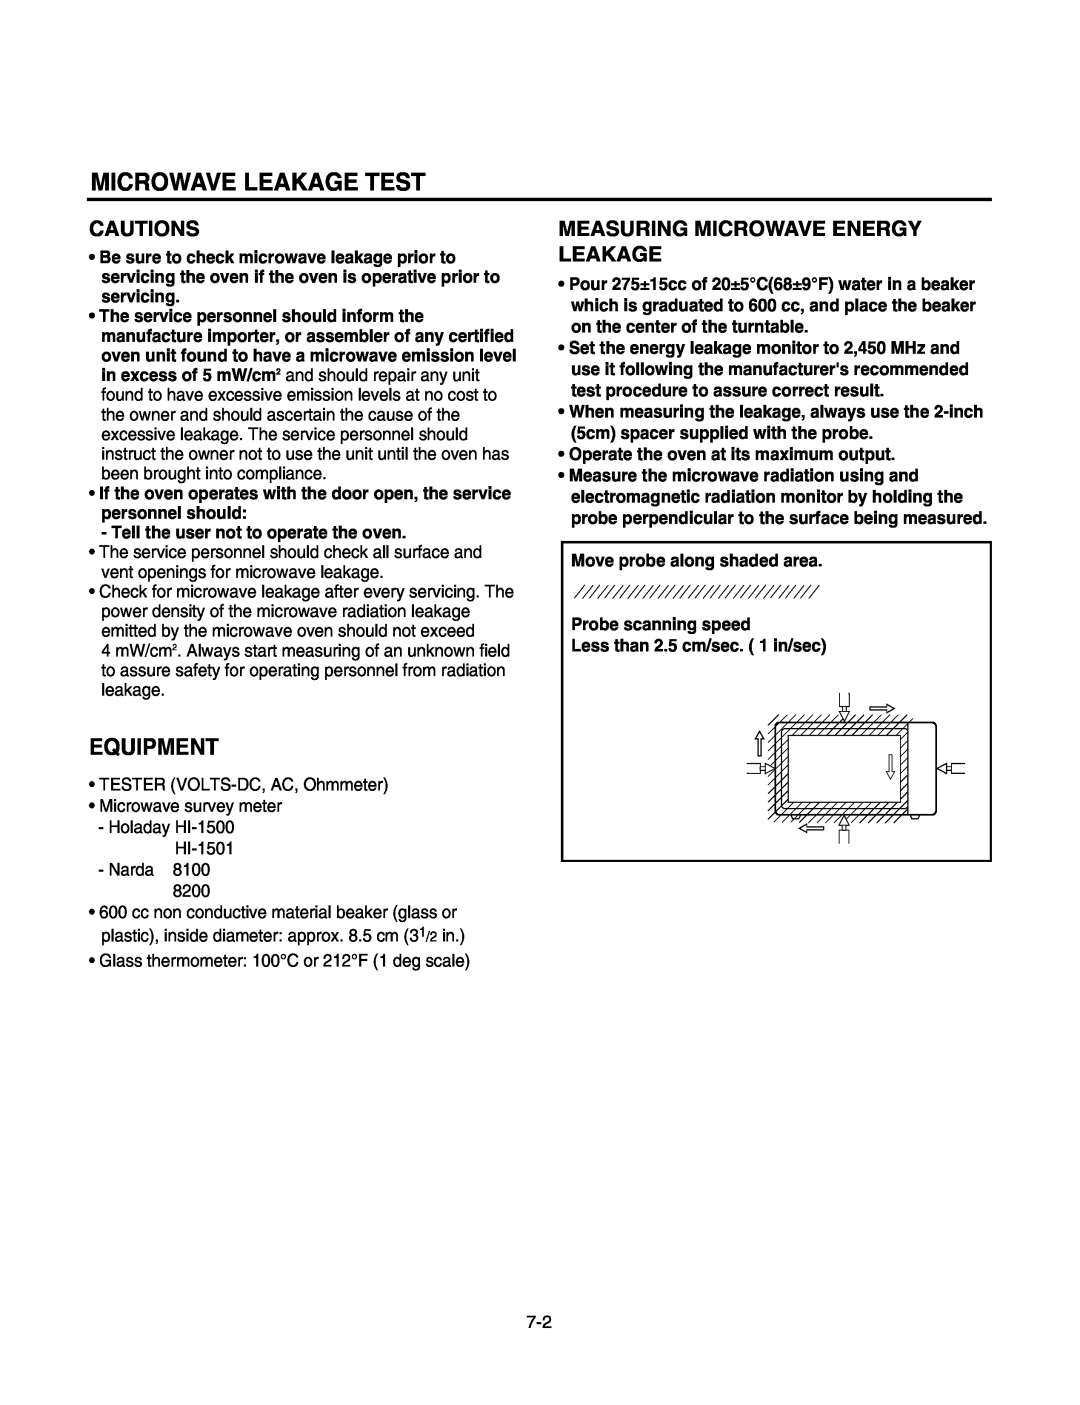 LG Electronics LMV1625W, LMV1625B service manual Microwave Leakage Test, Equipment, Tell the user not to operate the oven 